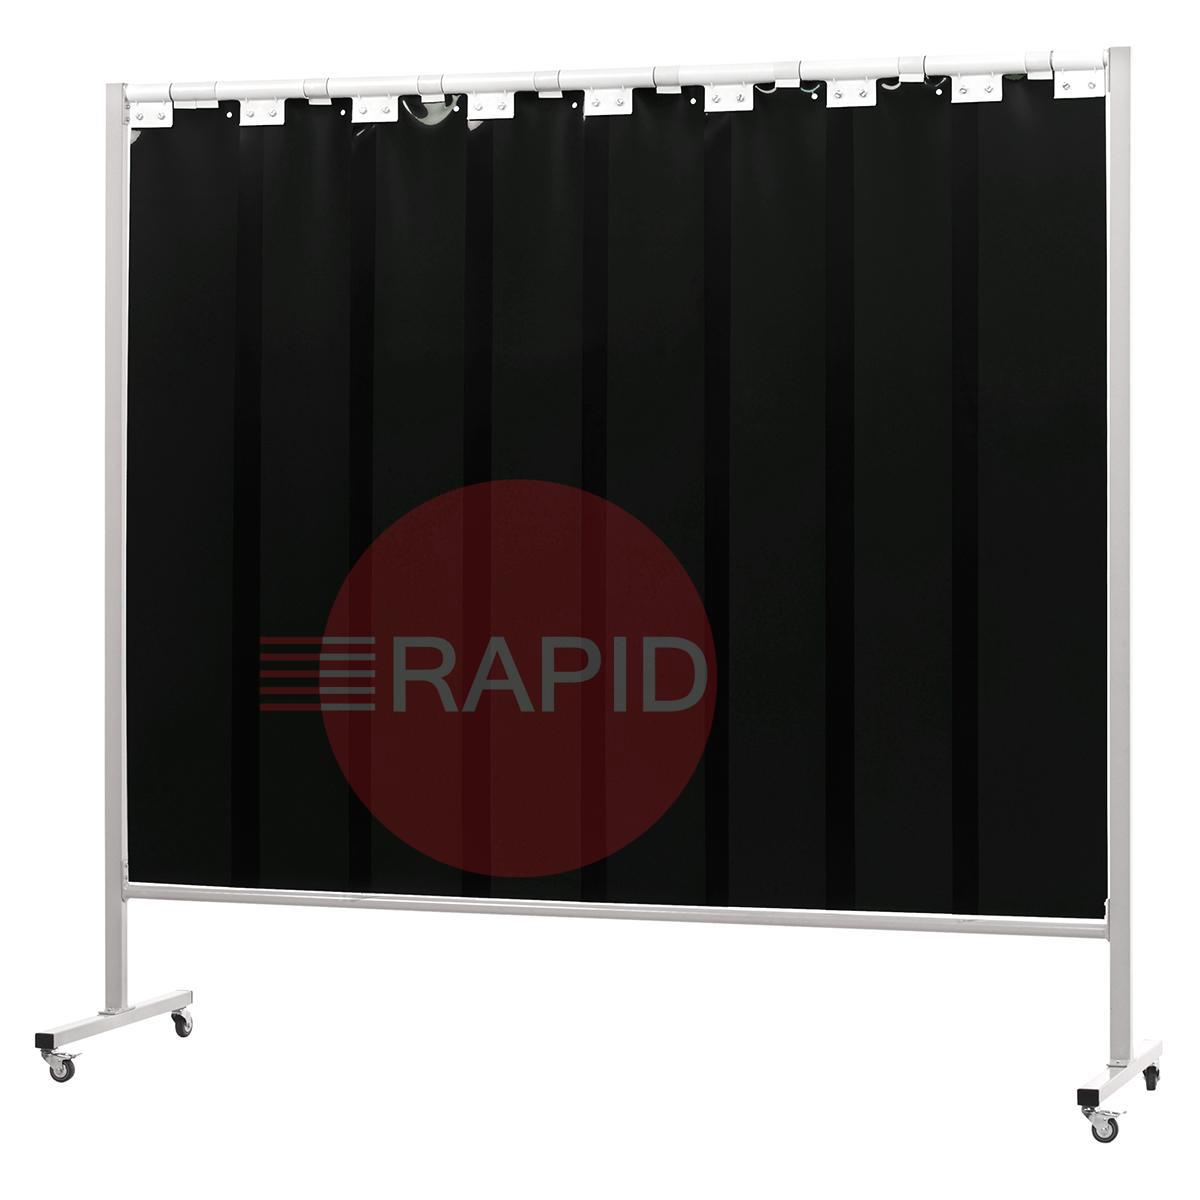 36.34.29  CEPRO Omnium Single Welding Screen, with Green-9 Strips - 2.2m Wide x 2m High, Approved EN 25980